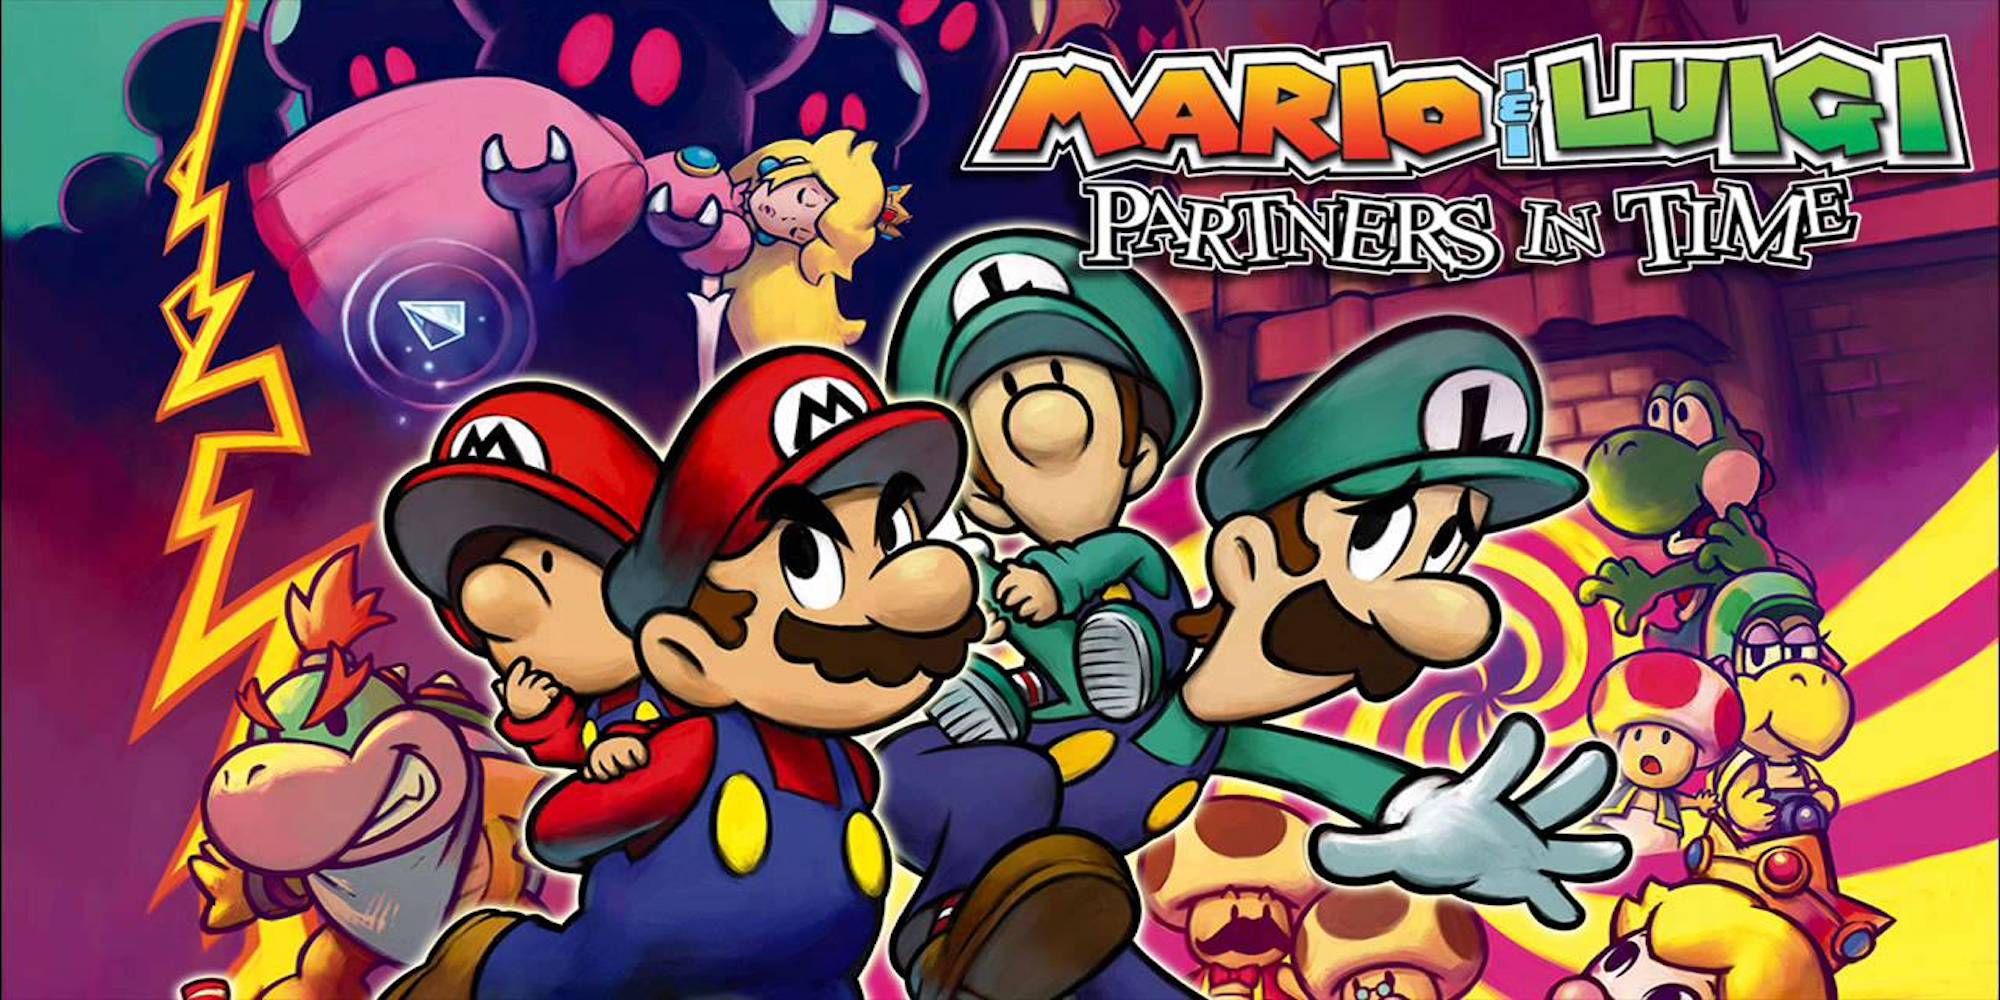 Mario & Luigi: Partners In Time - Mario, Luigi, Baby Mario, And Baby Luigi Surrounded By The Supporting Cast